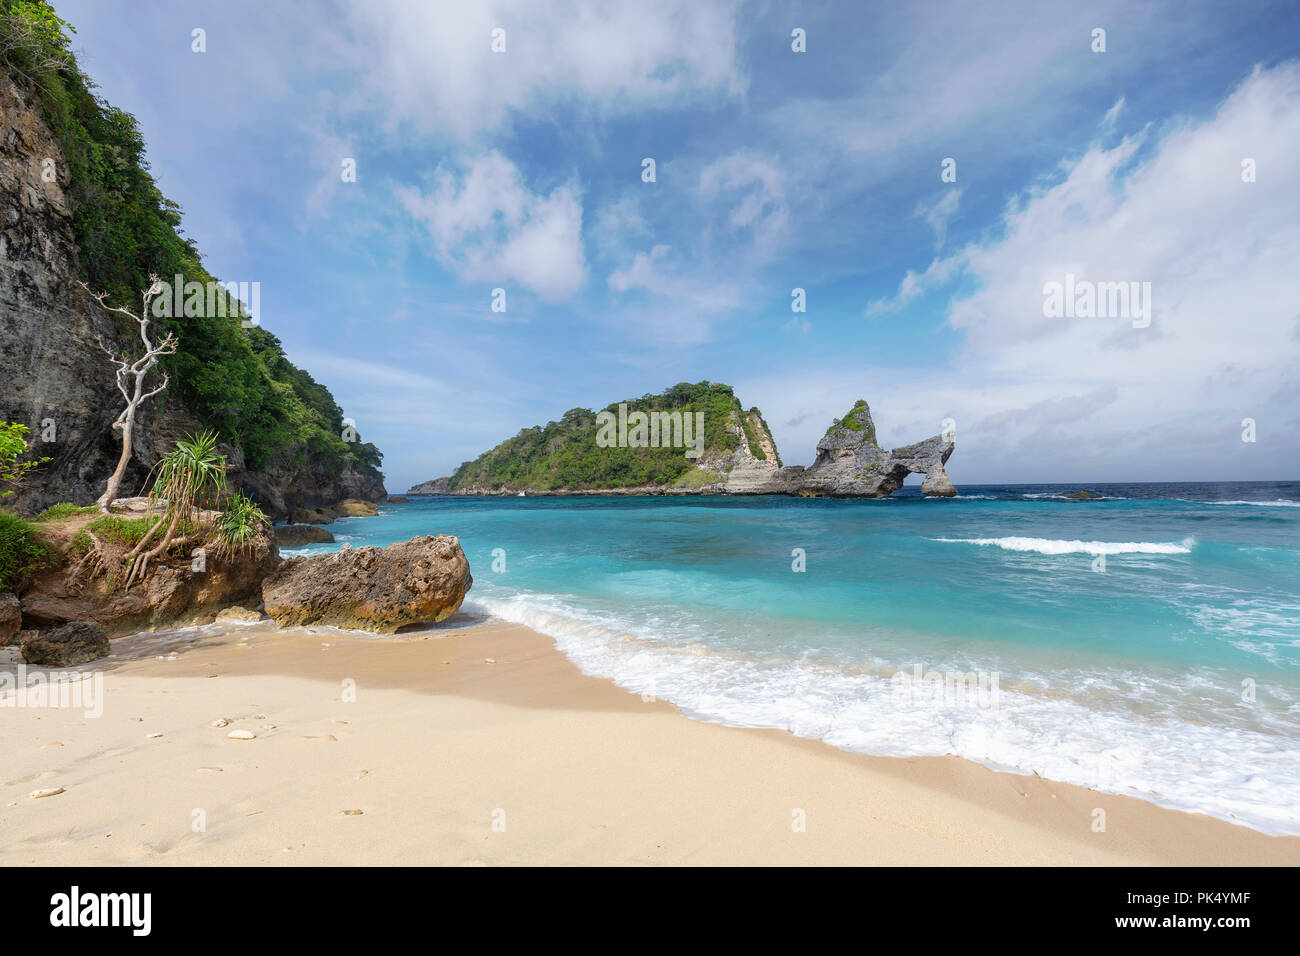 Beautiful view of part of Atuh Beach on Nusa Penida in Indonesia. Stock Photo